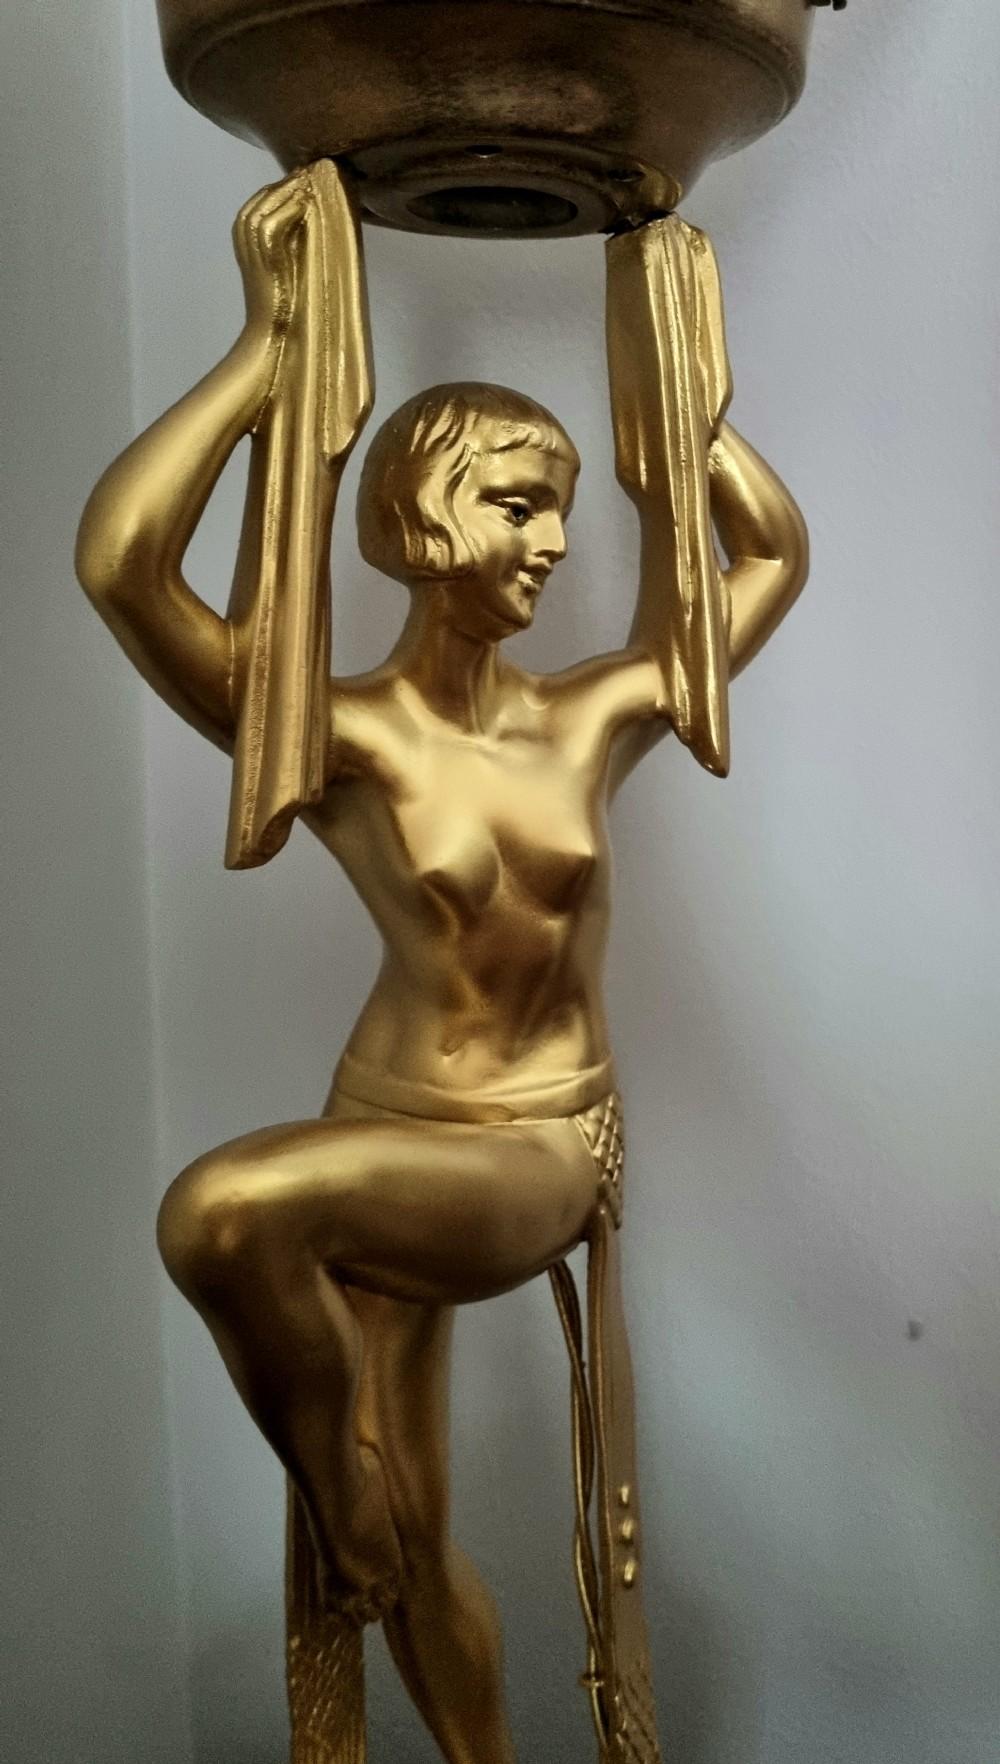  Stylish French 1930s Art Déco table lamp,
Nude dancing Lady on a marble and onyx stand , signed Limousin . In good antique, working condition with usial signs of age and use .
67 cm high x 19.5 cm wide including globe, UK plug. 